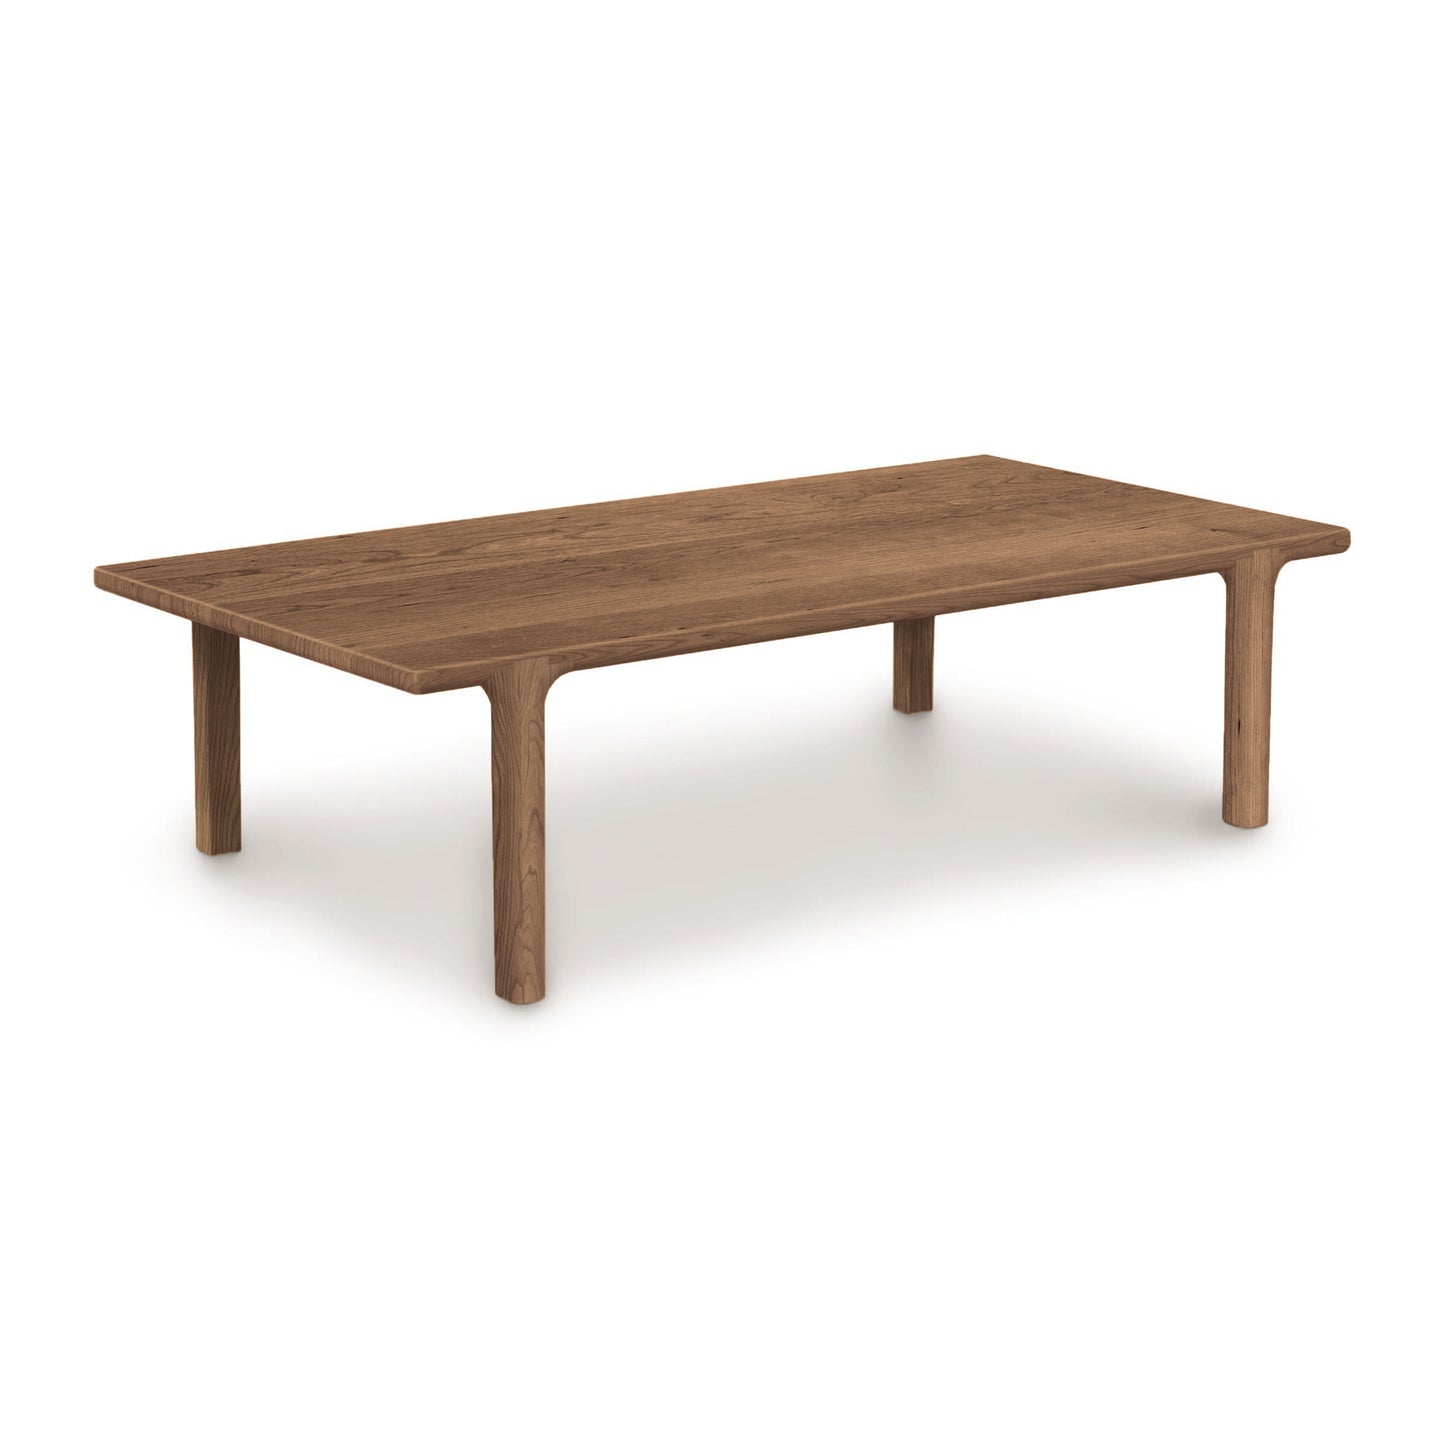 A Sierra Rectangular Coffee Table by Copeland Furniture with four legs on a white background.